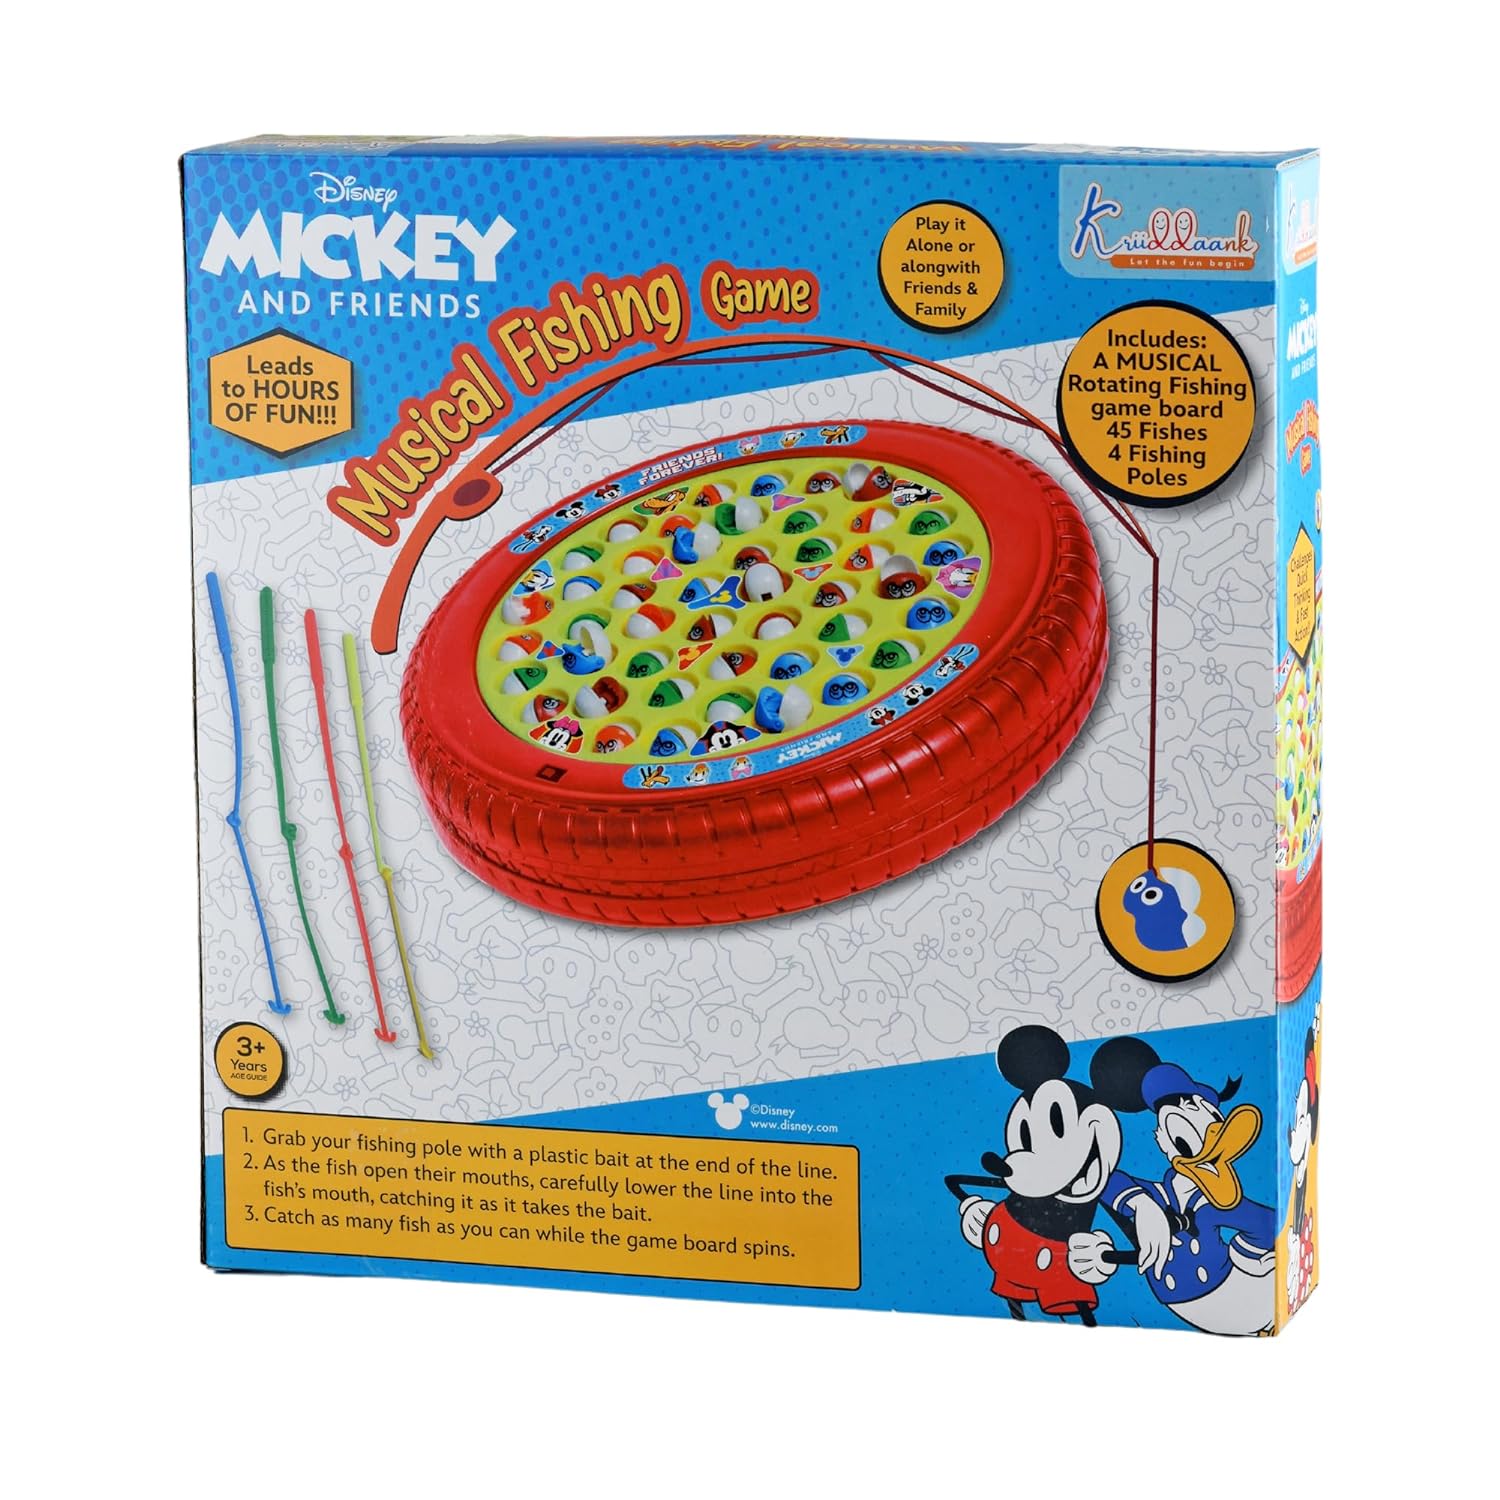 Disney Mickey Musical Fishing Game Fish Catching Board Game Toy 45 Fishes with Big Round Pond & 4 Fish Catching Sticks for Kids